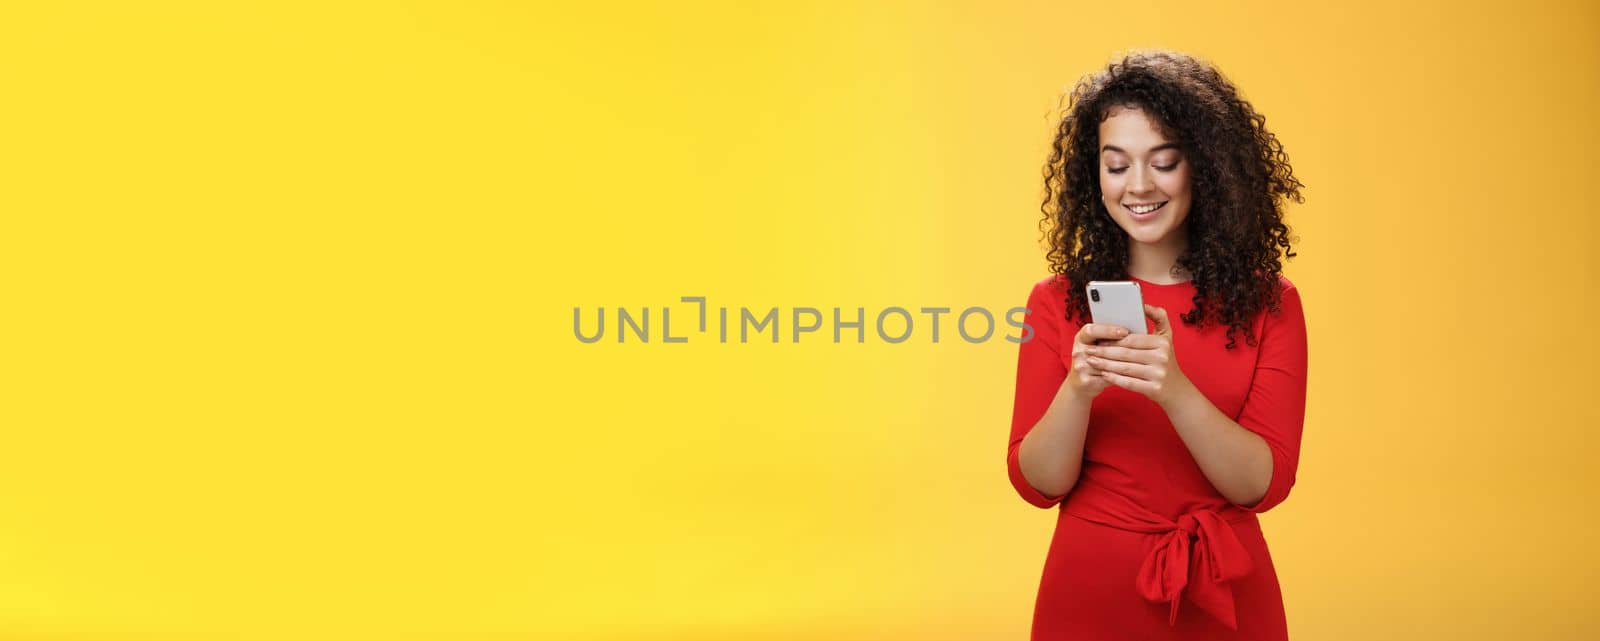 Lifestyle. Gil sending message spread news across social network having party inviting friends via smartphone holding mobile phone in hands smiling broadly at device screen as posing over yellow background.